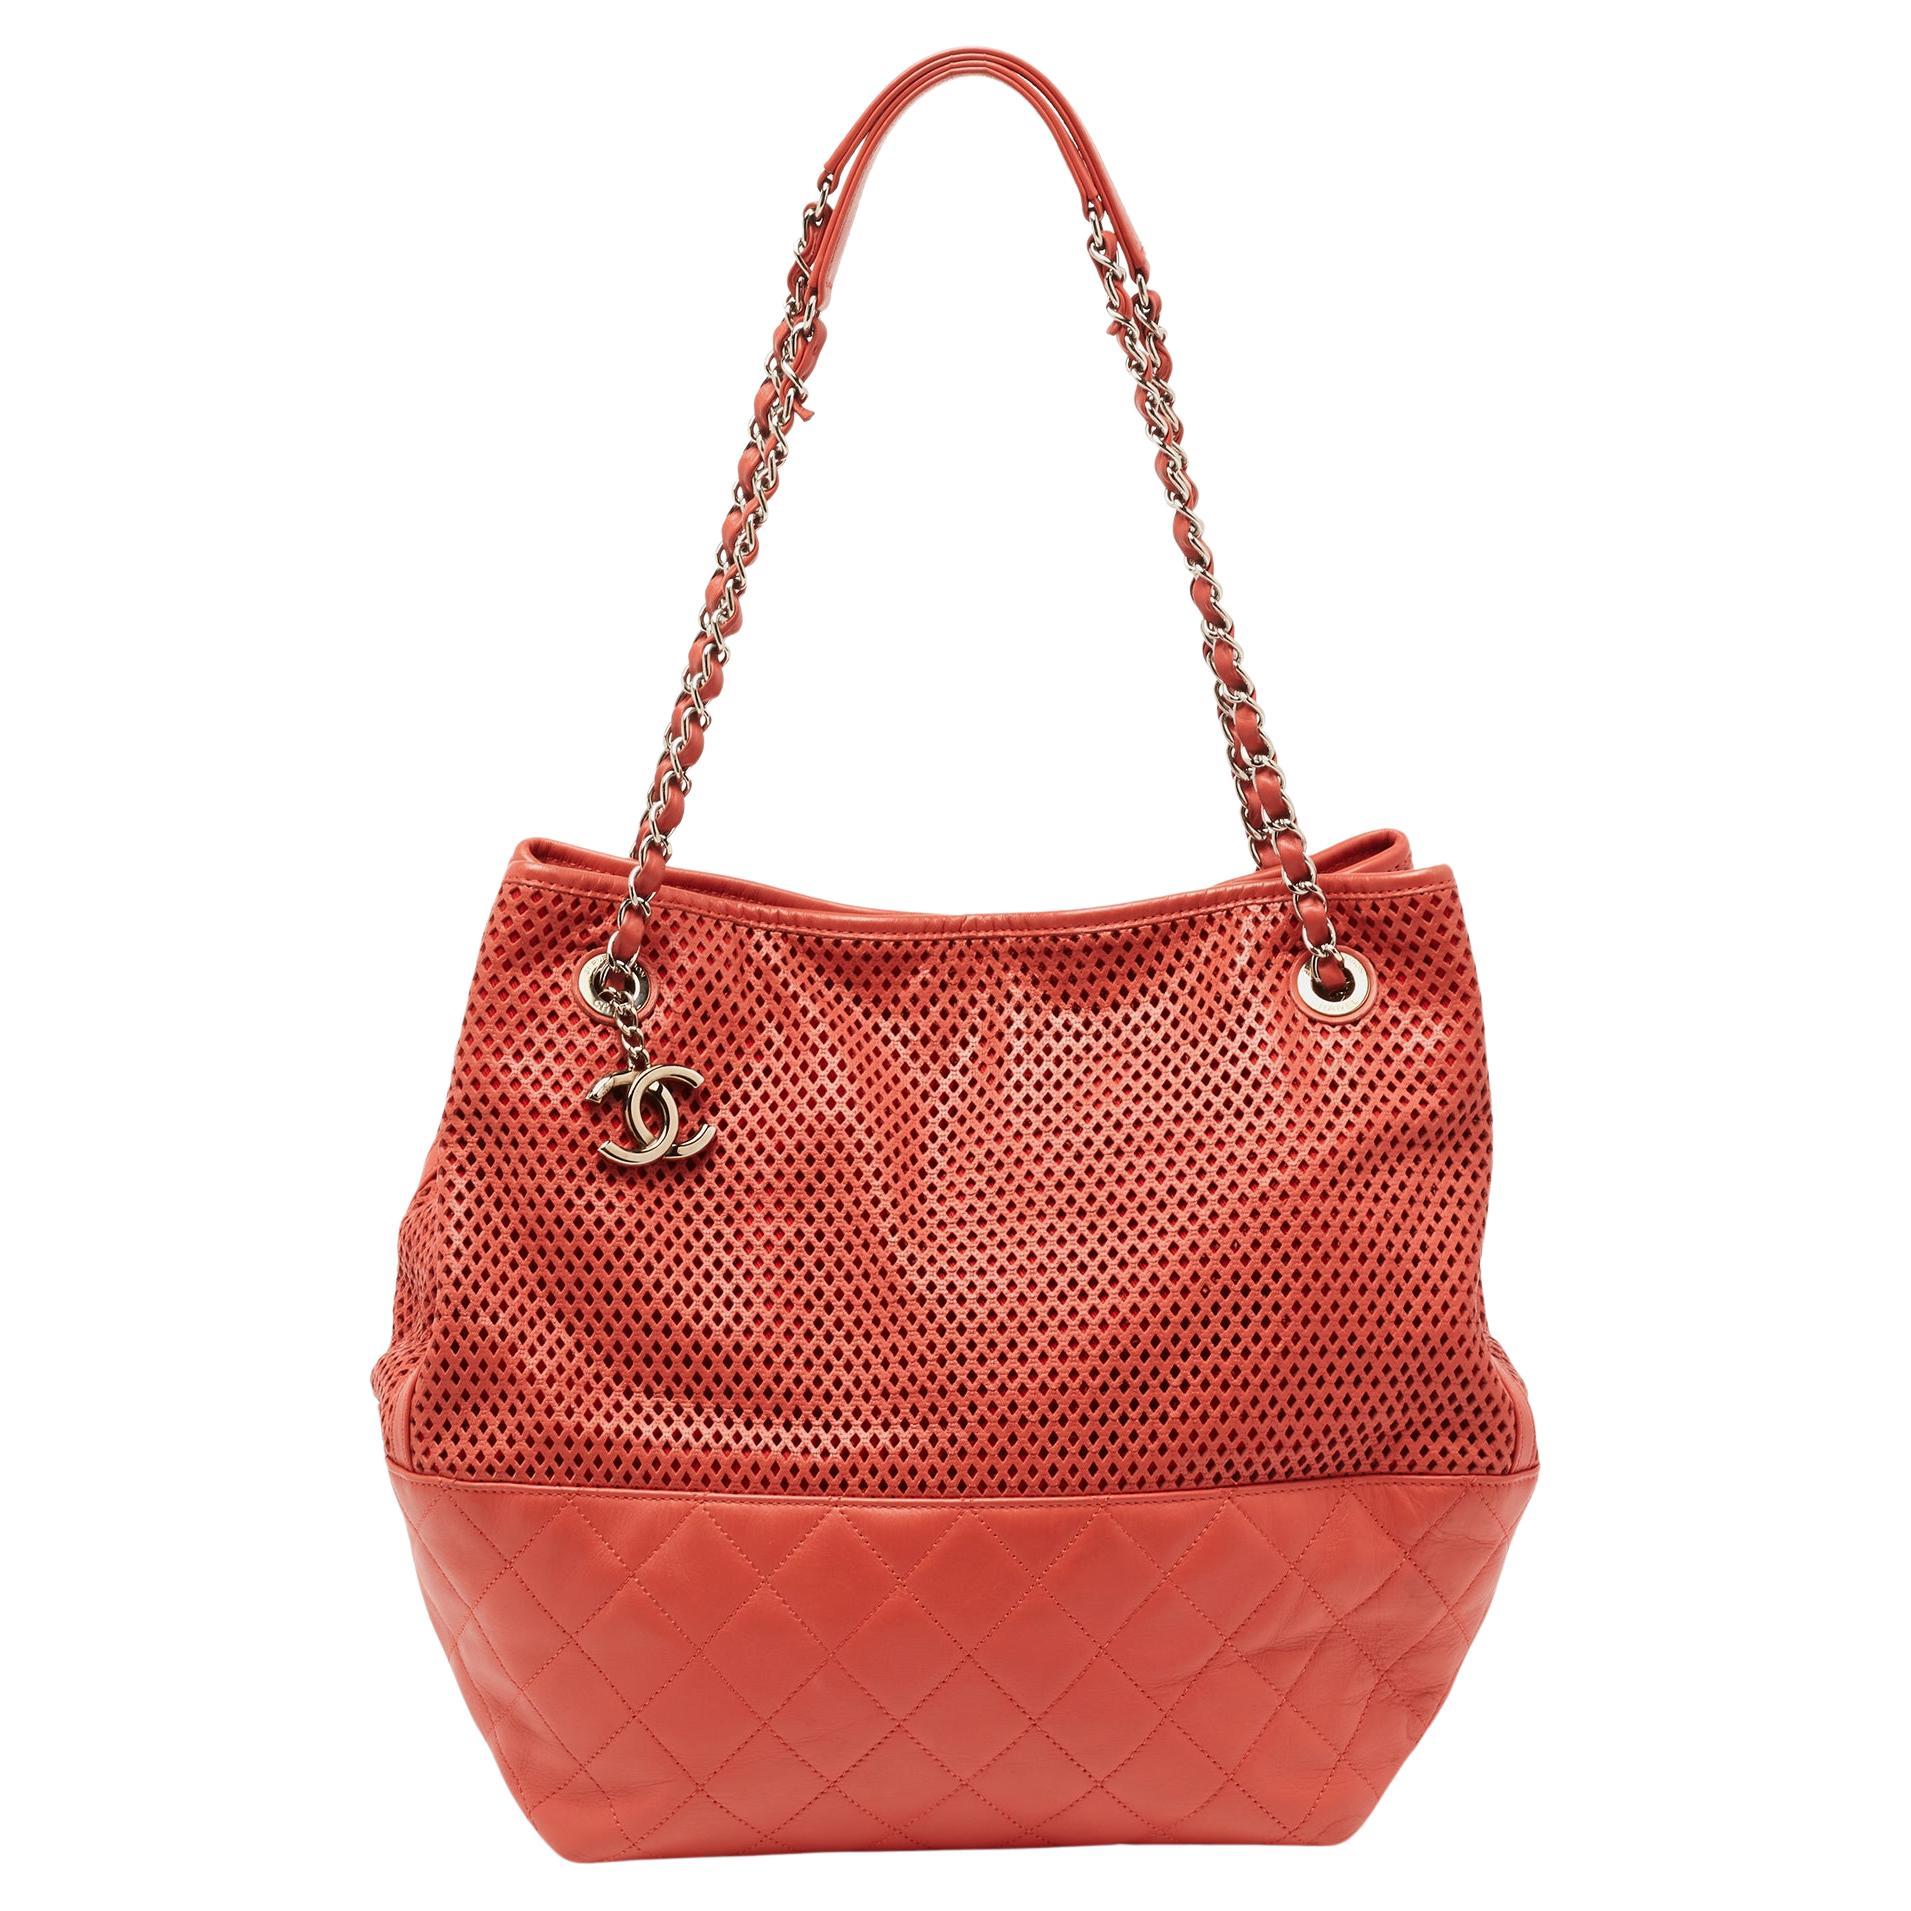 Chanel Orange Perforated Leather Up In The Air Tote